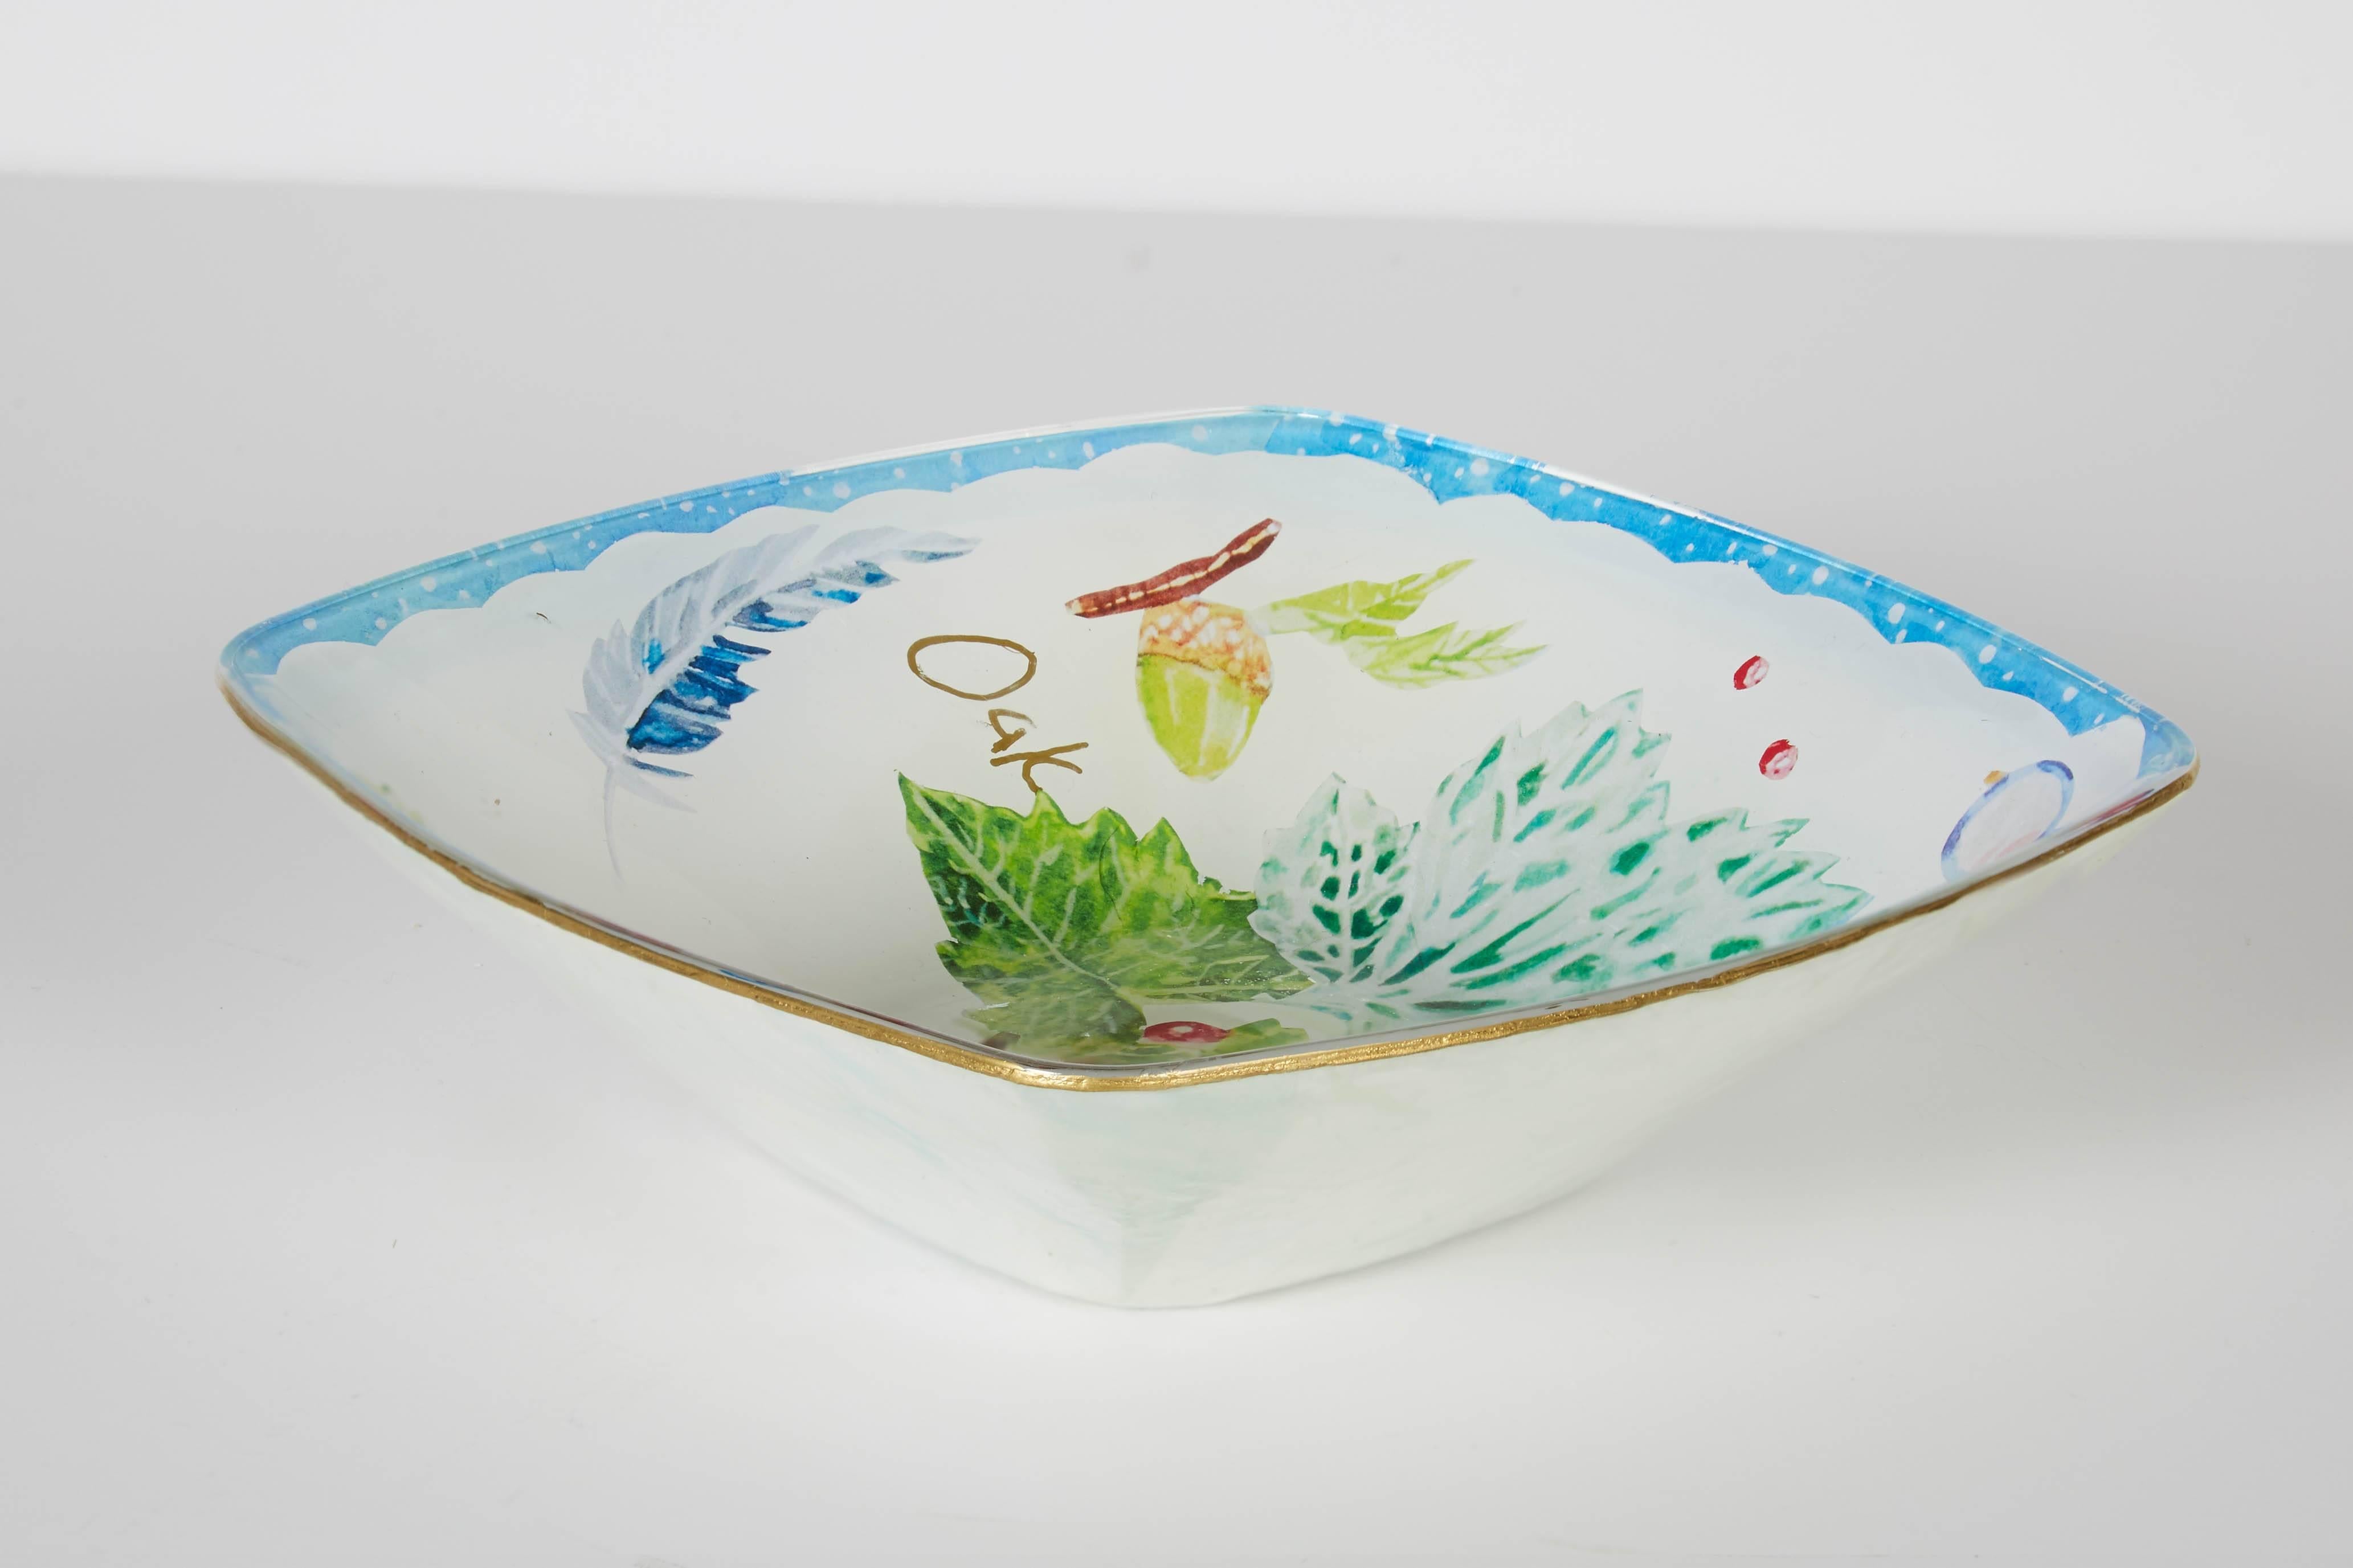 Handmade decoupage currant bowl, designed by Cathy Graham and crafted by Scott Potter.